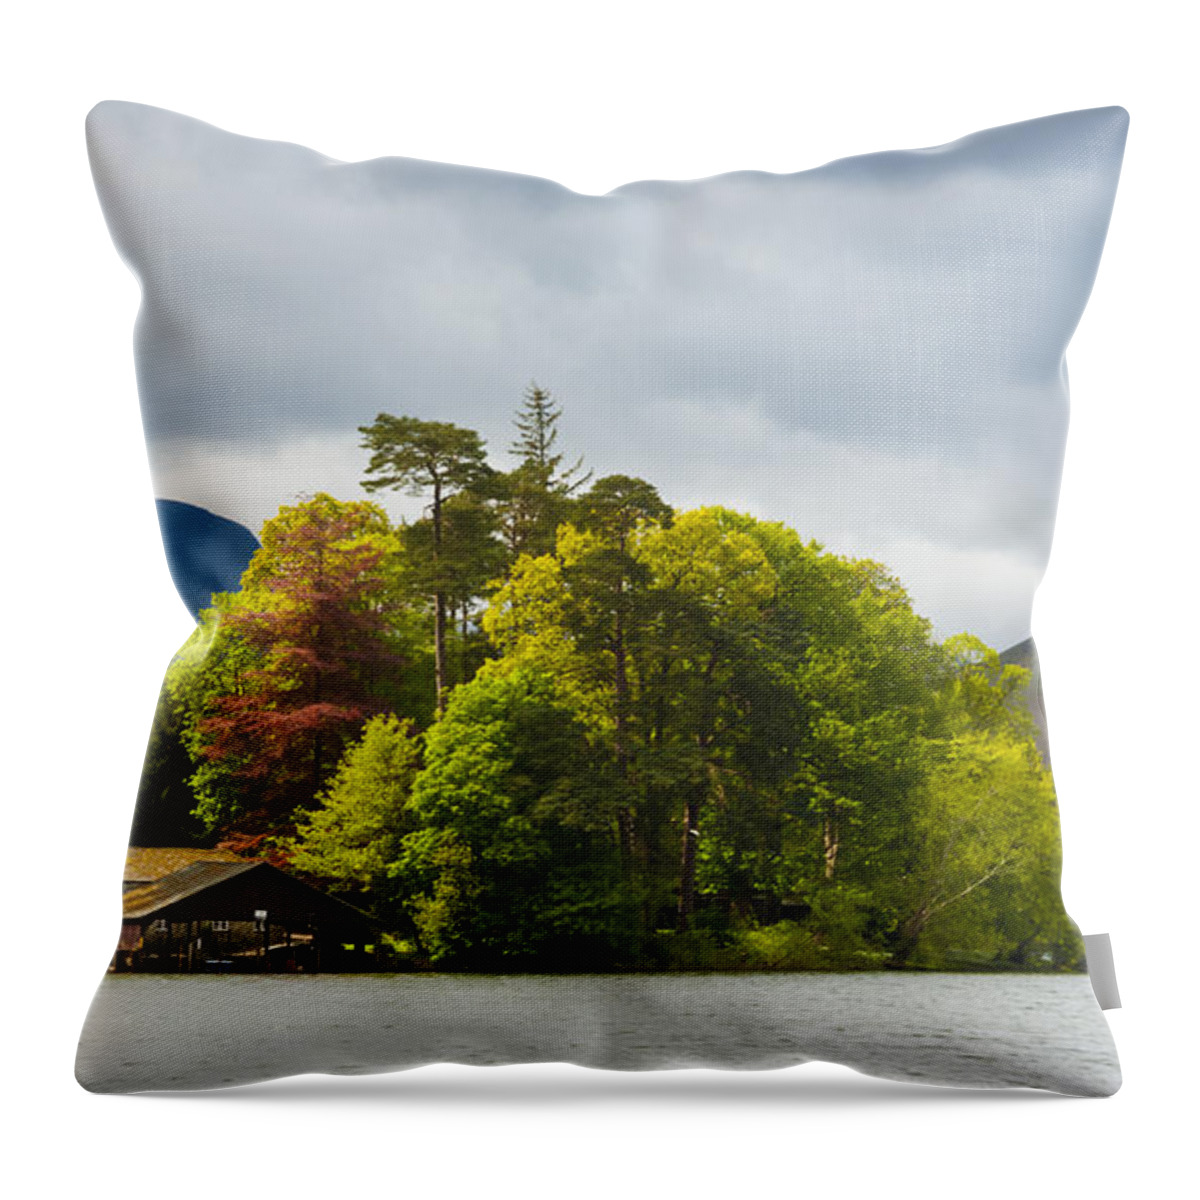 England Throw Pillow featuring the photograph Derwentwater Boathouse by John Paul Cullen